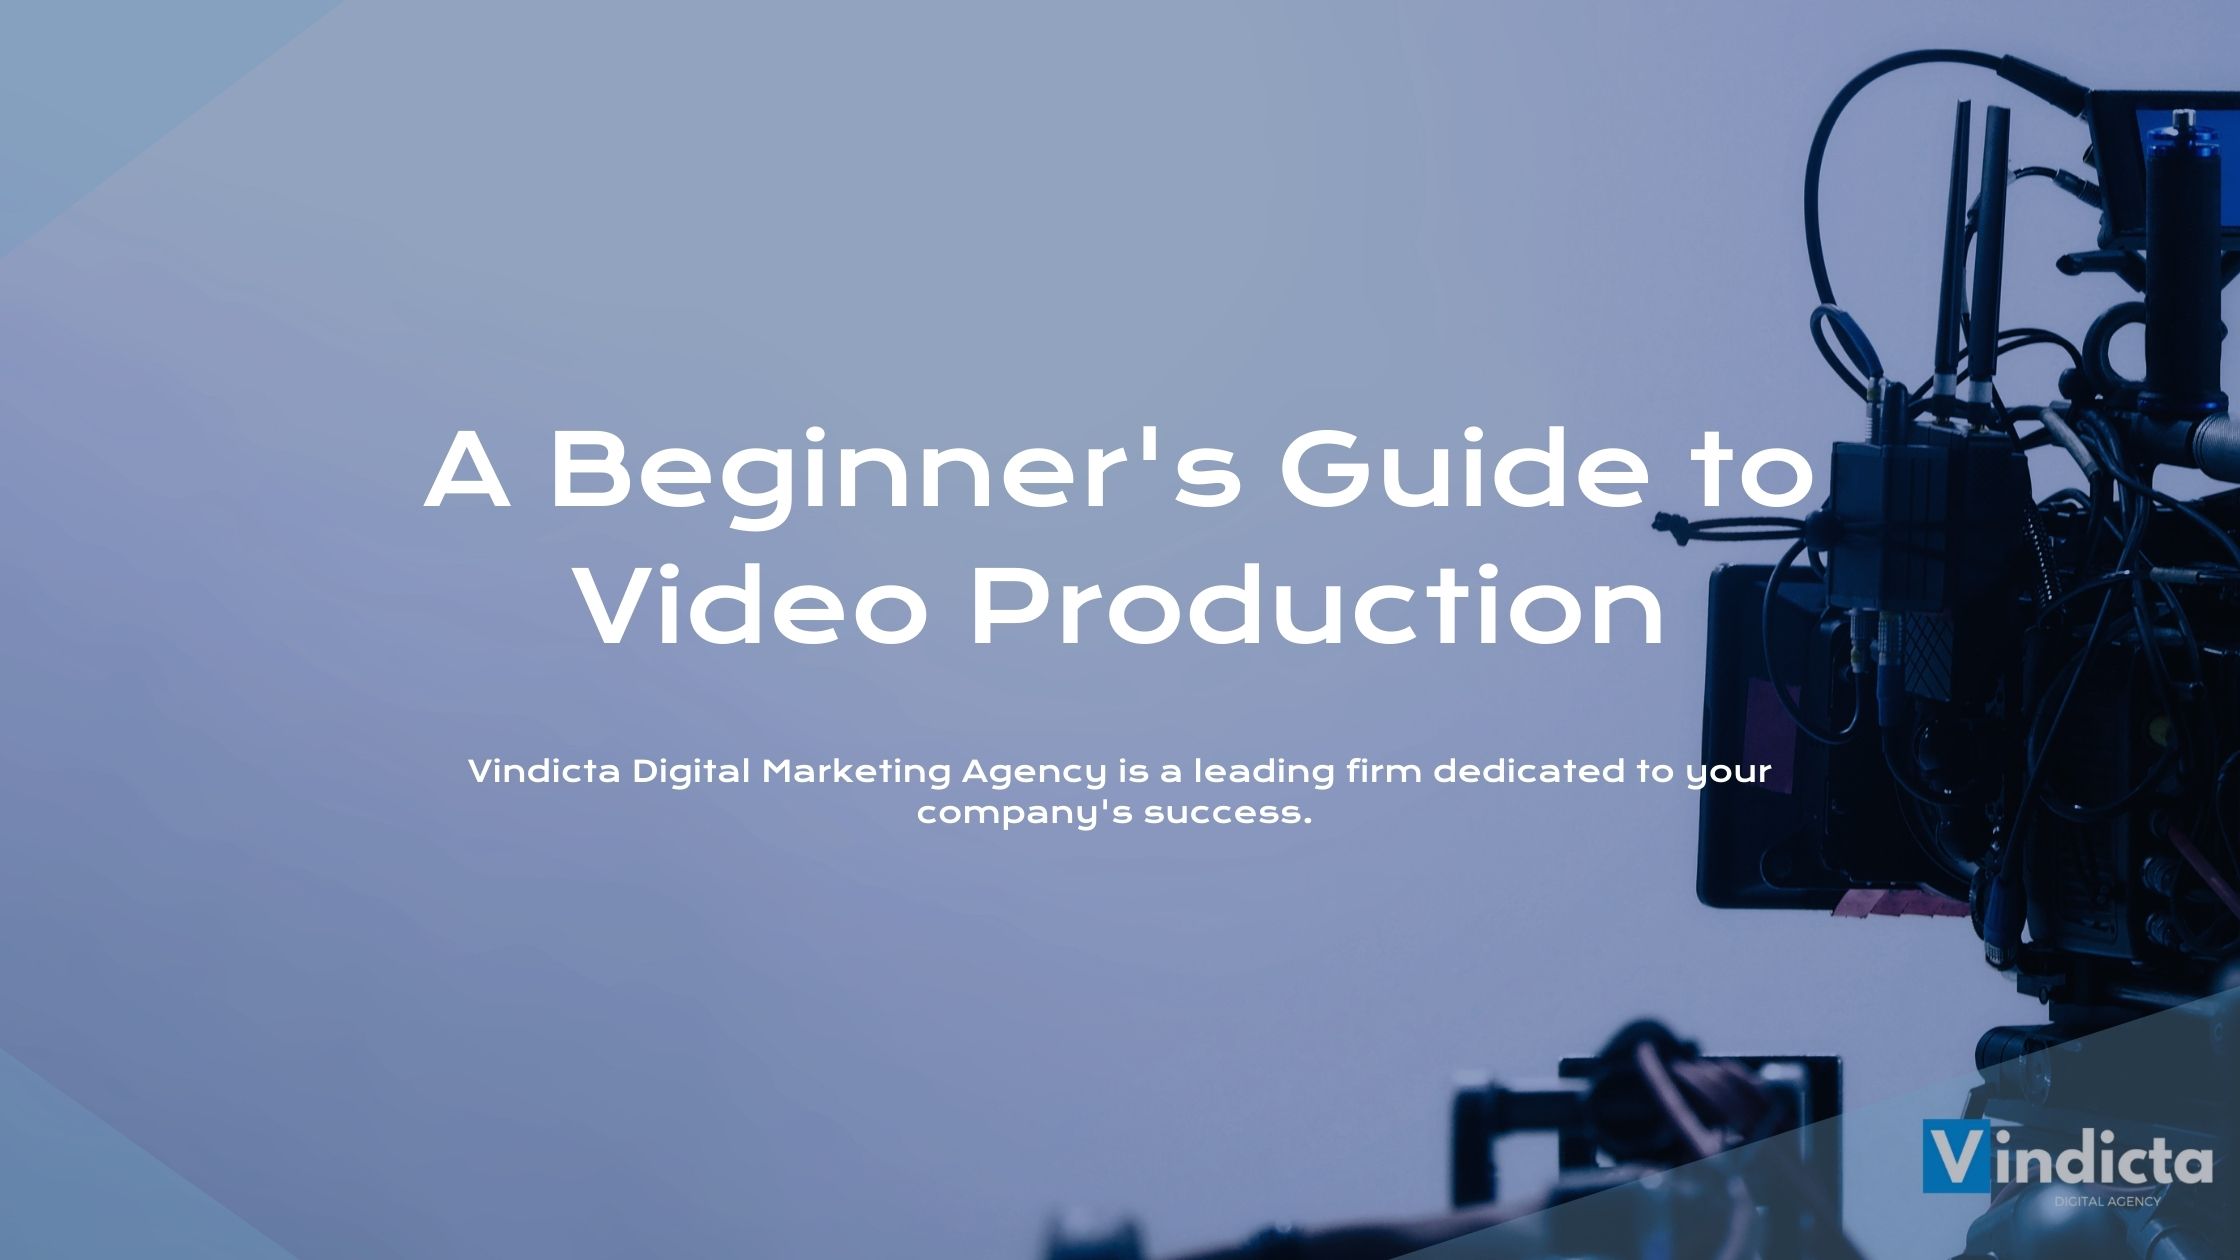 A Beginner's Guide to Video Production